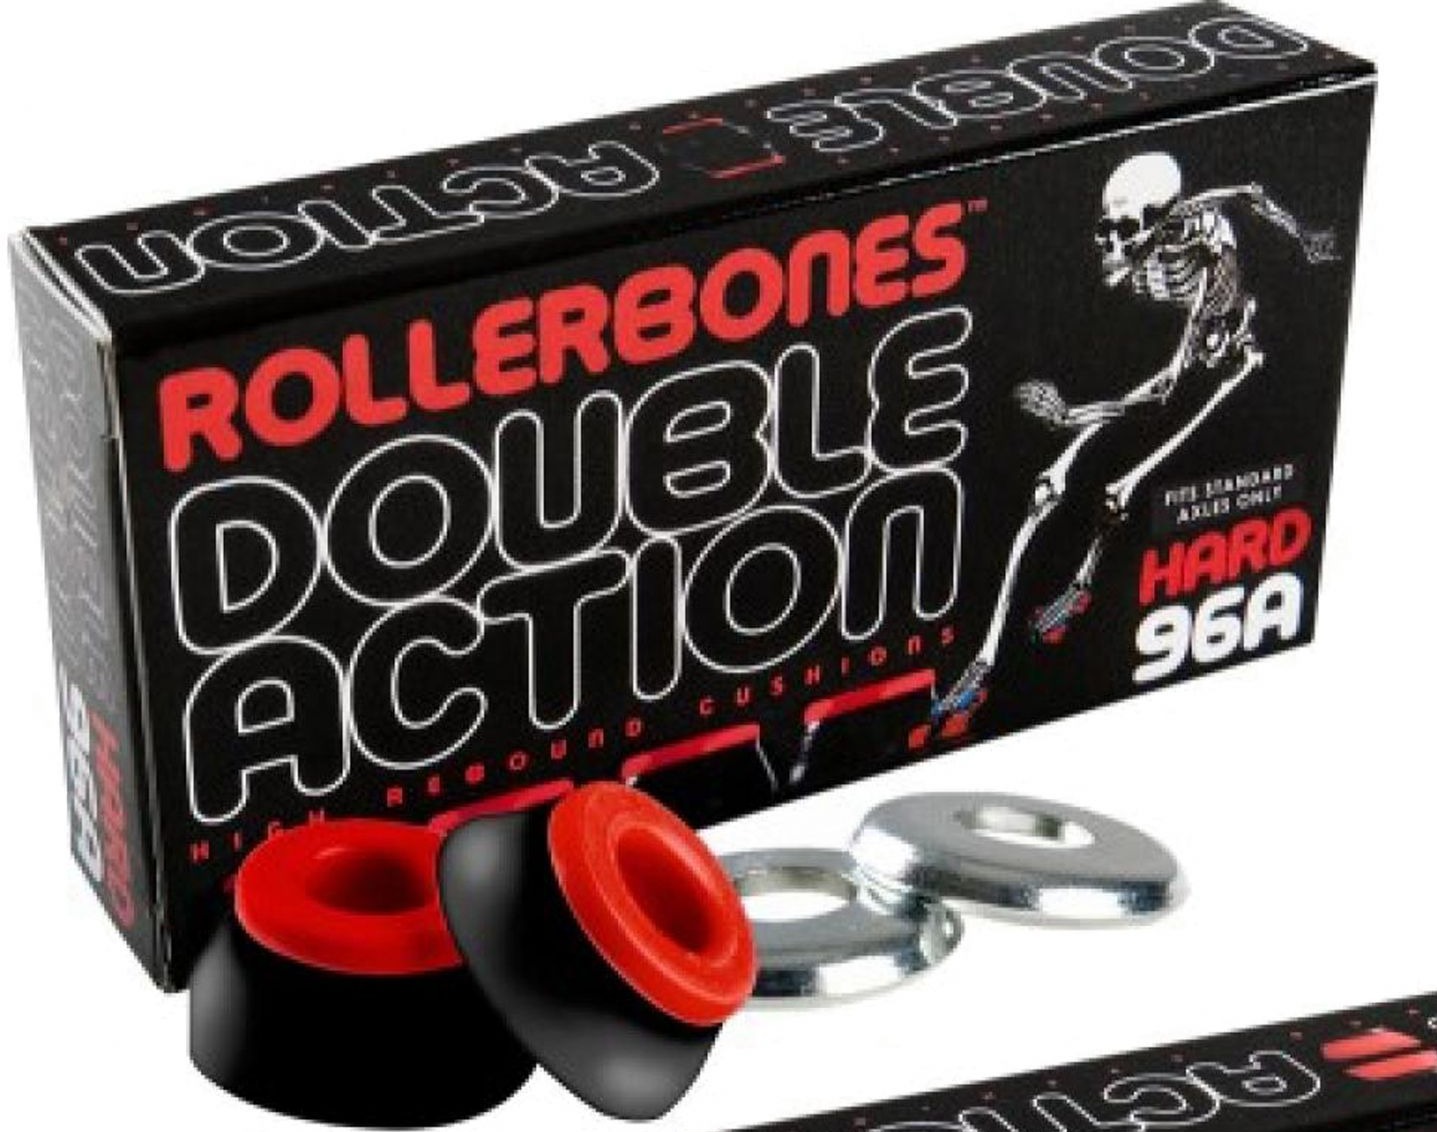 Rollerbones Double Action Skate Cushions